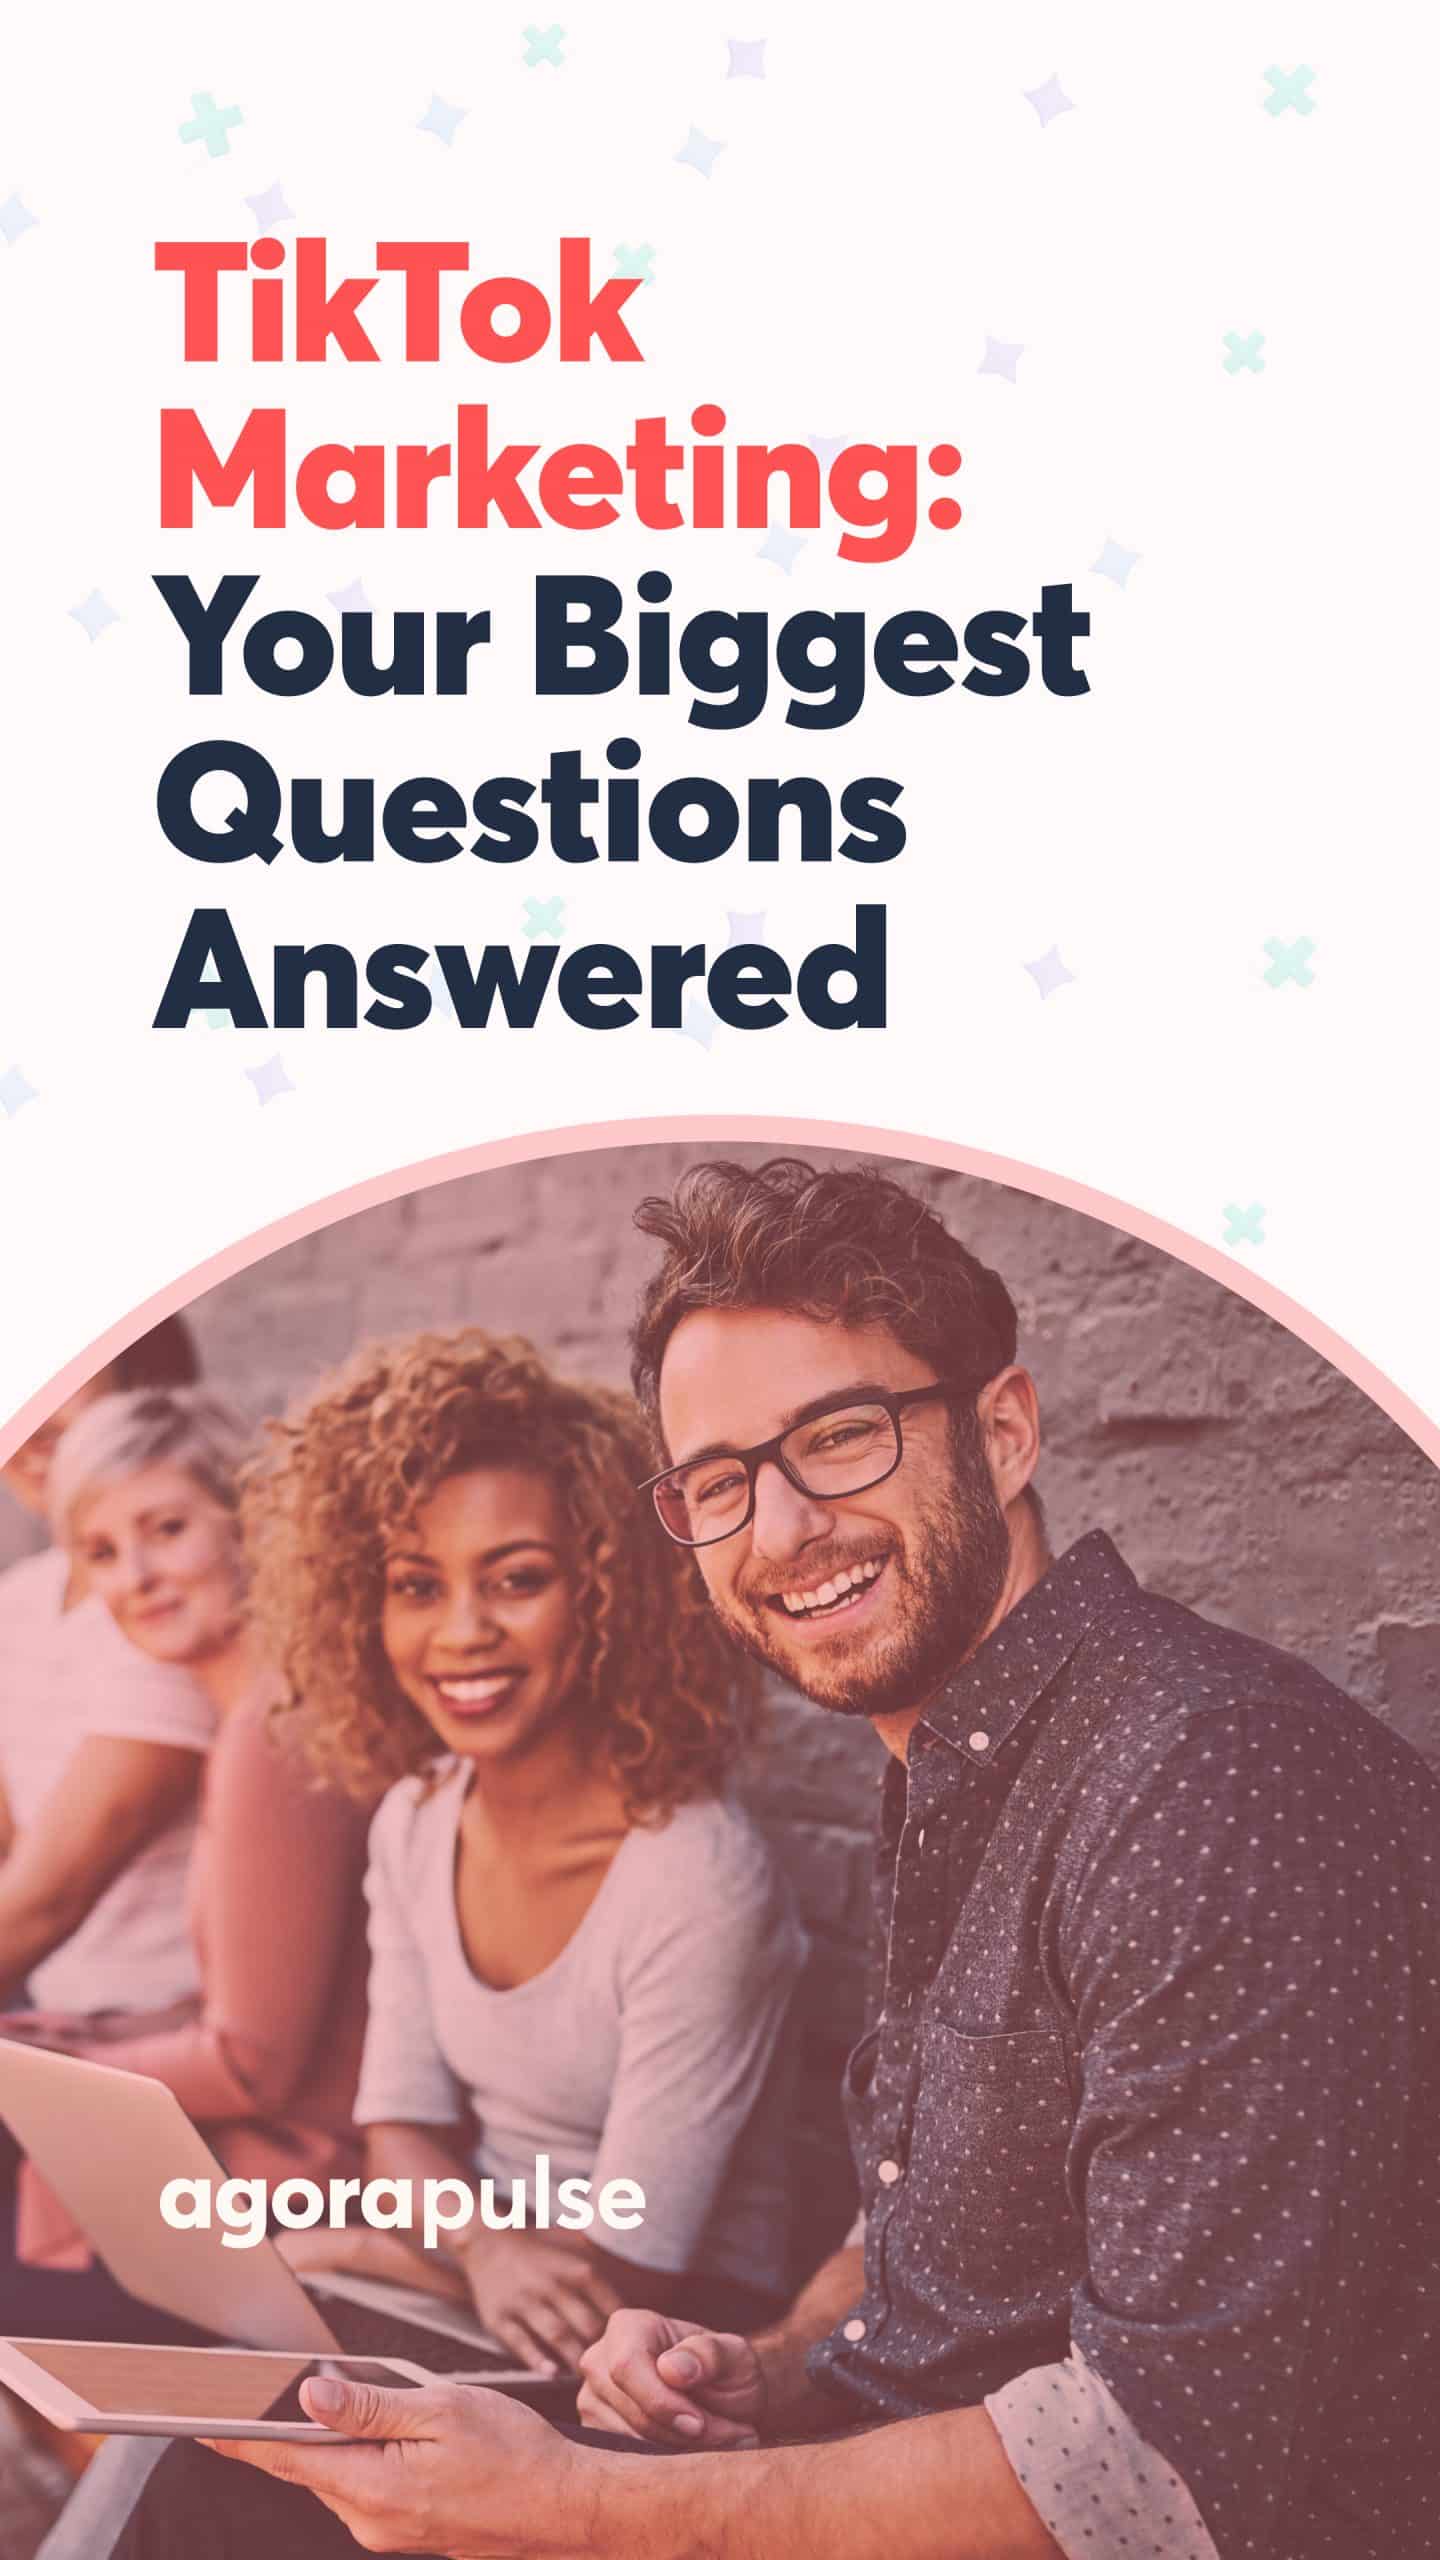 TikTok Marketing: Your Biggest Questions Answered!